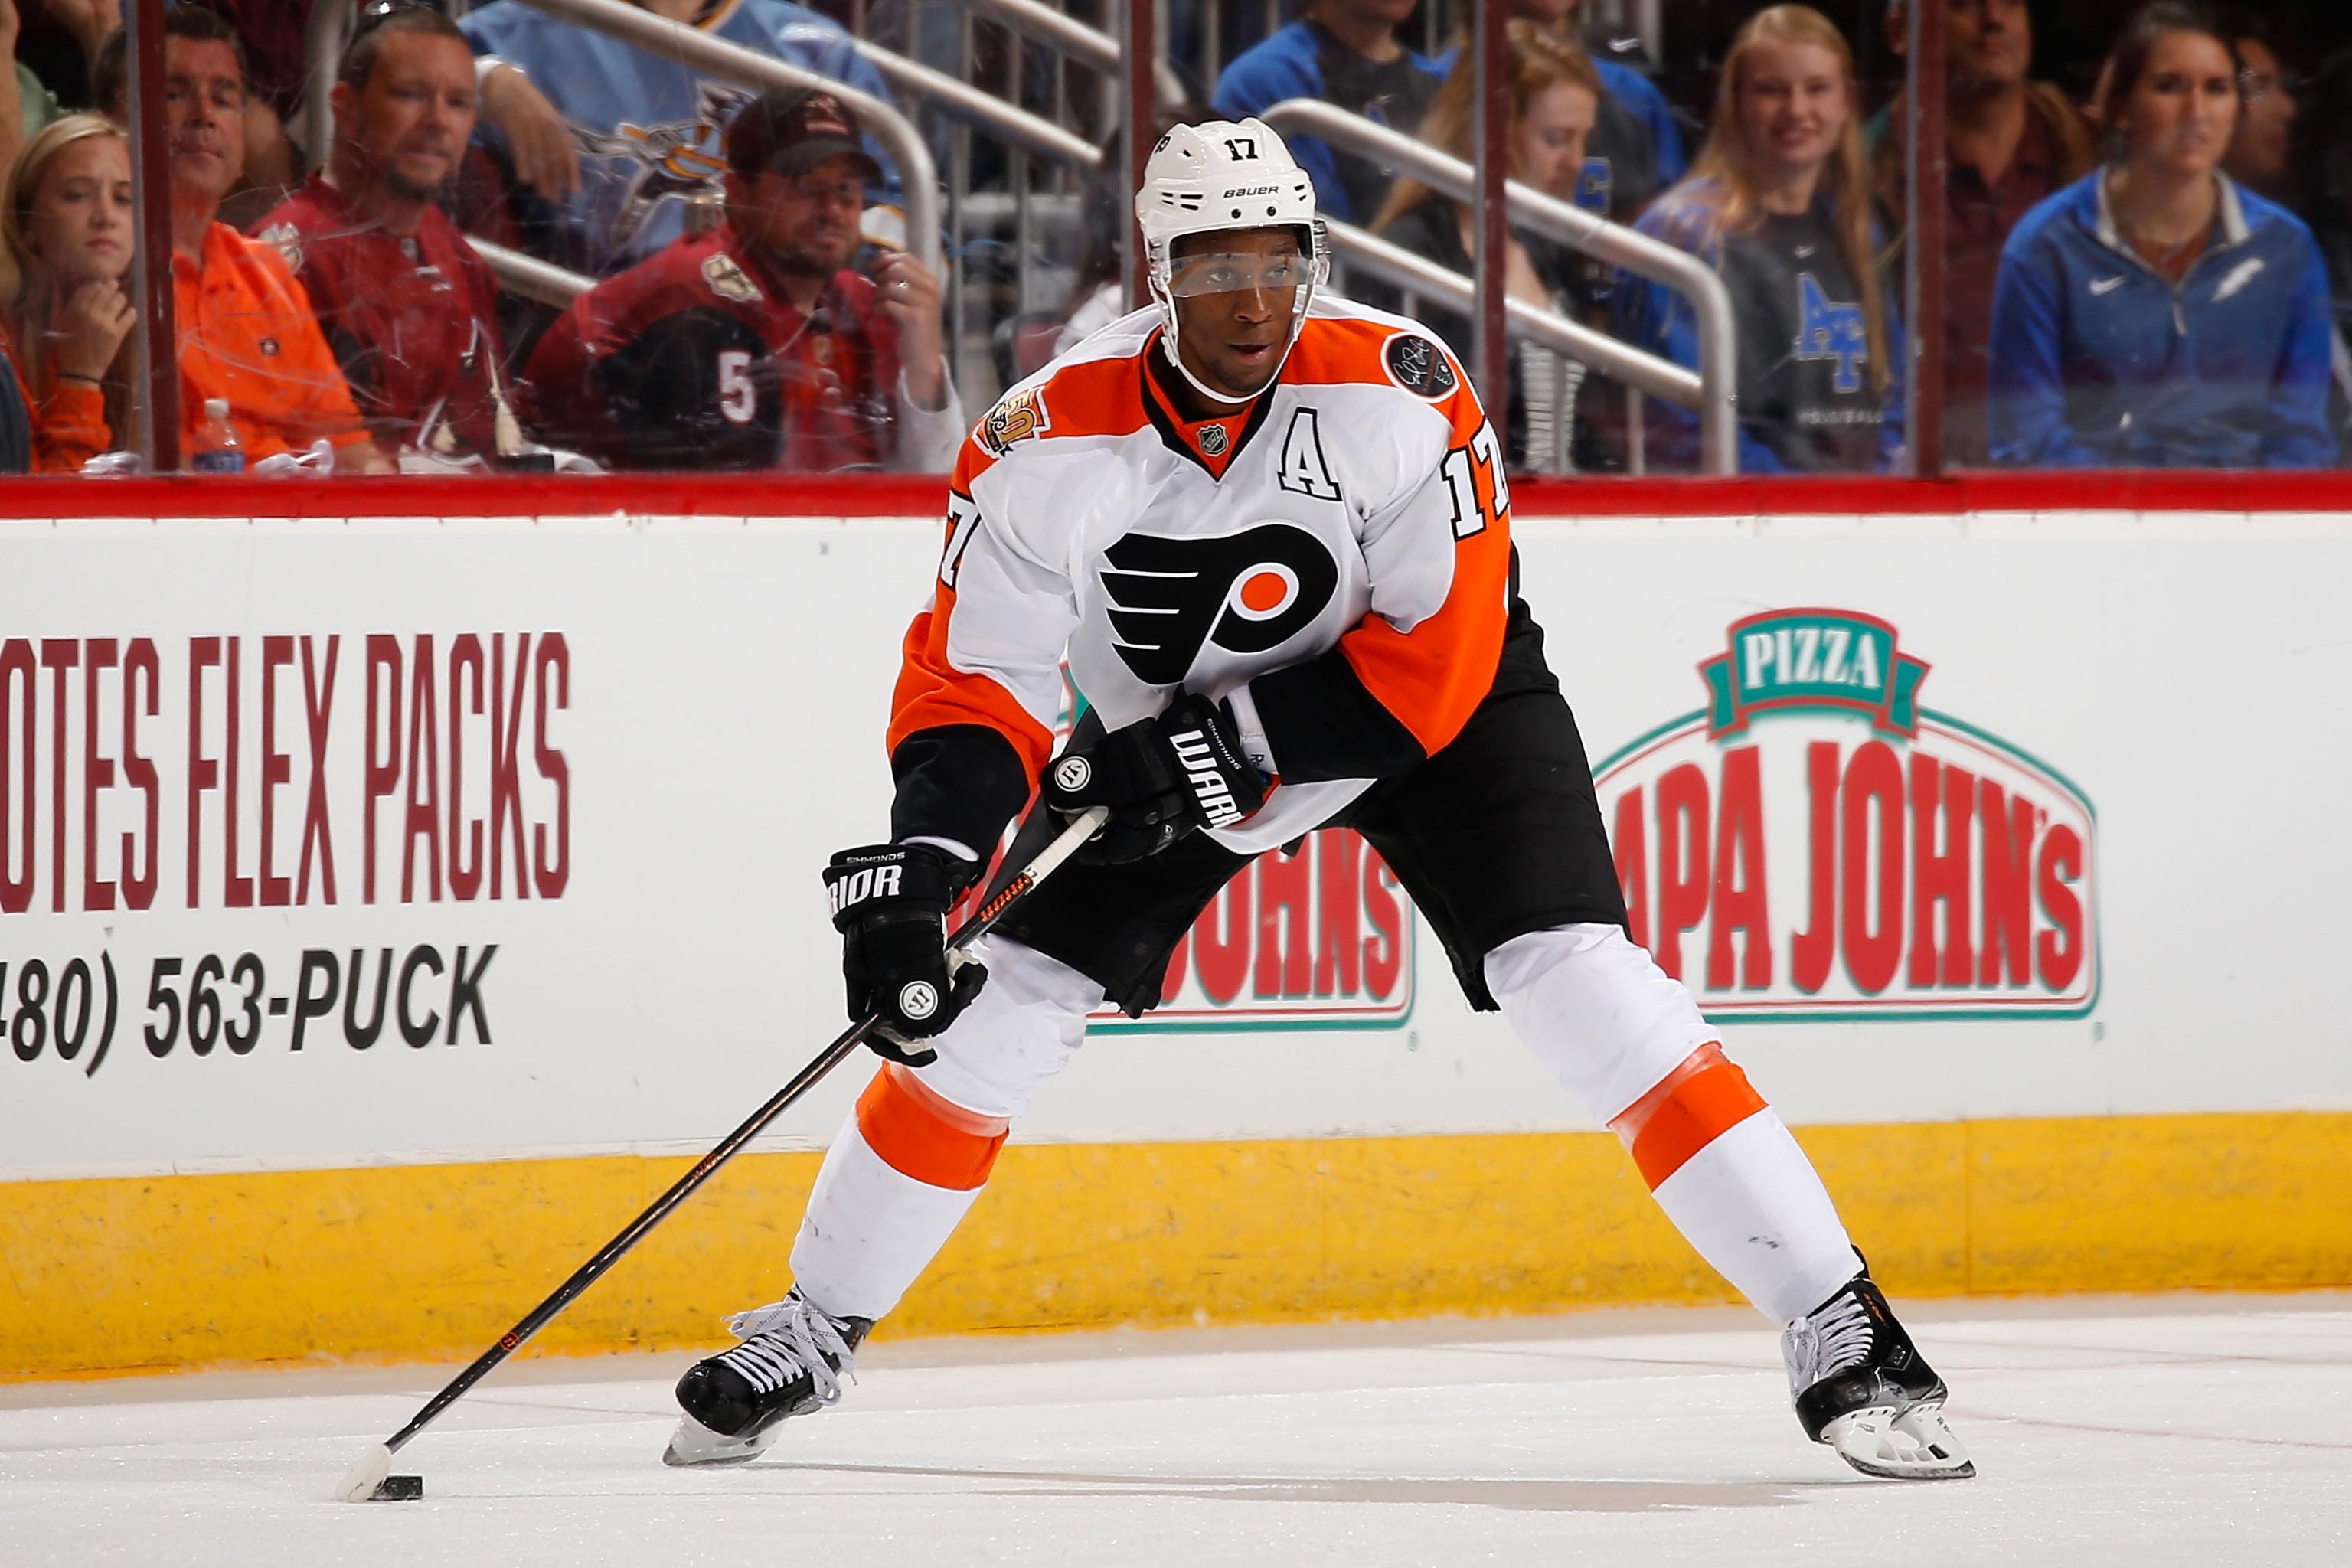 Flyers trade up to add Wisdom, whose mentor is Wayne Simmonds